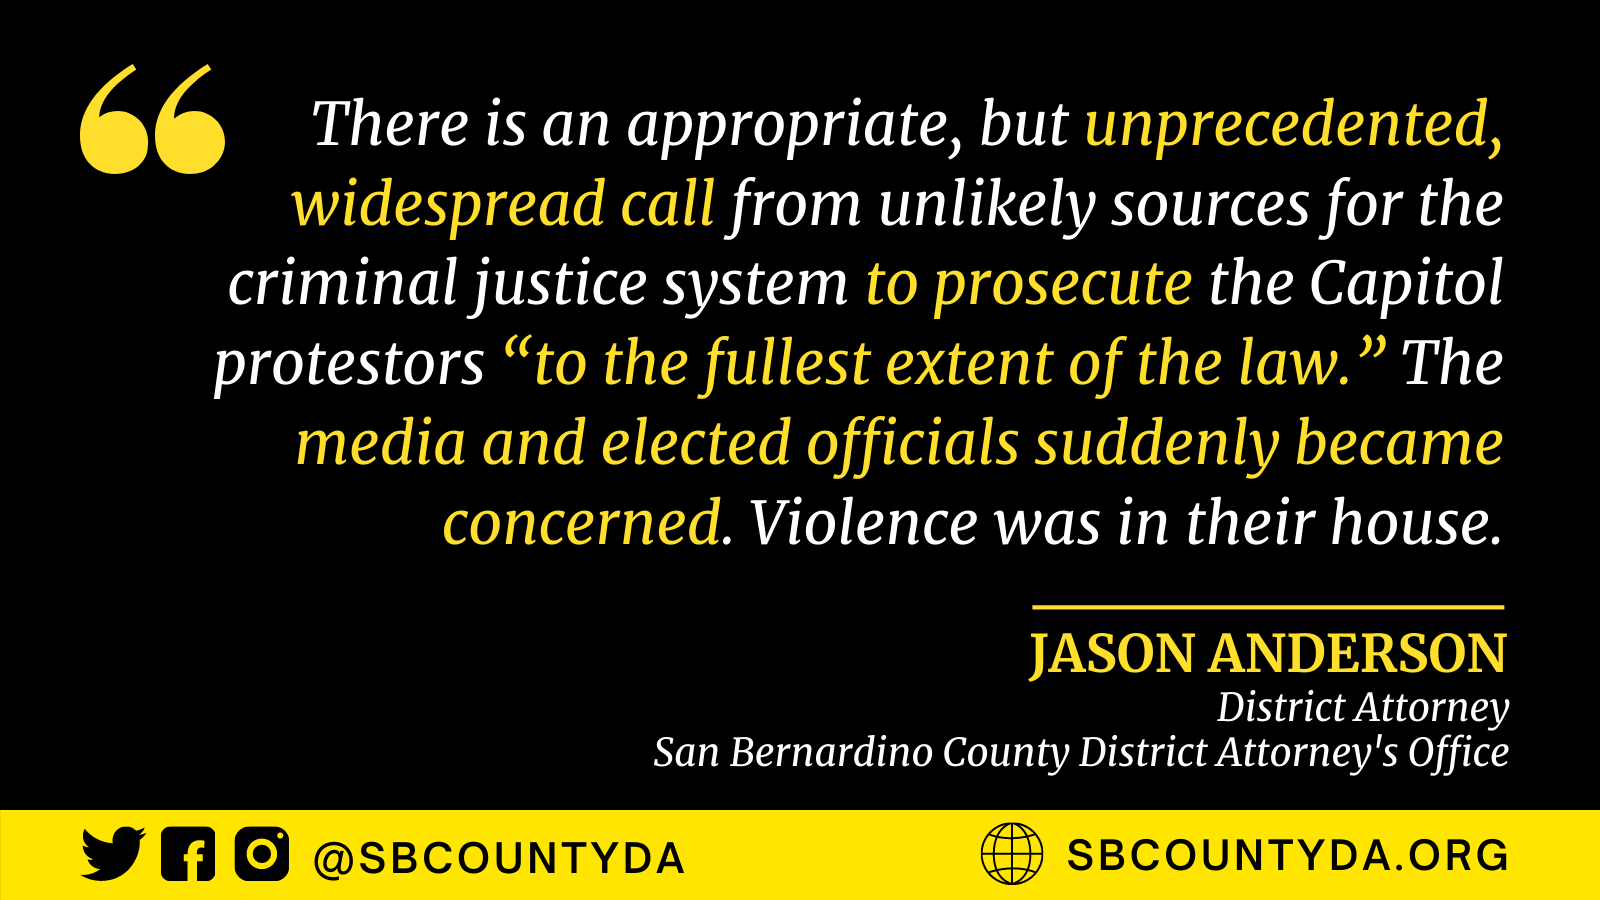 Quote from District Attorney Jason Anderson found in article.